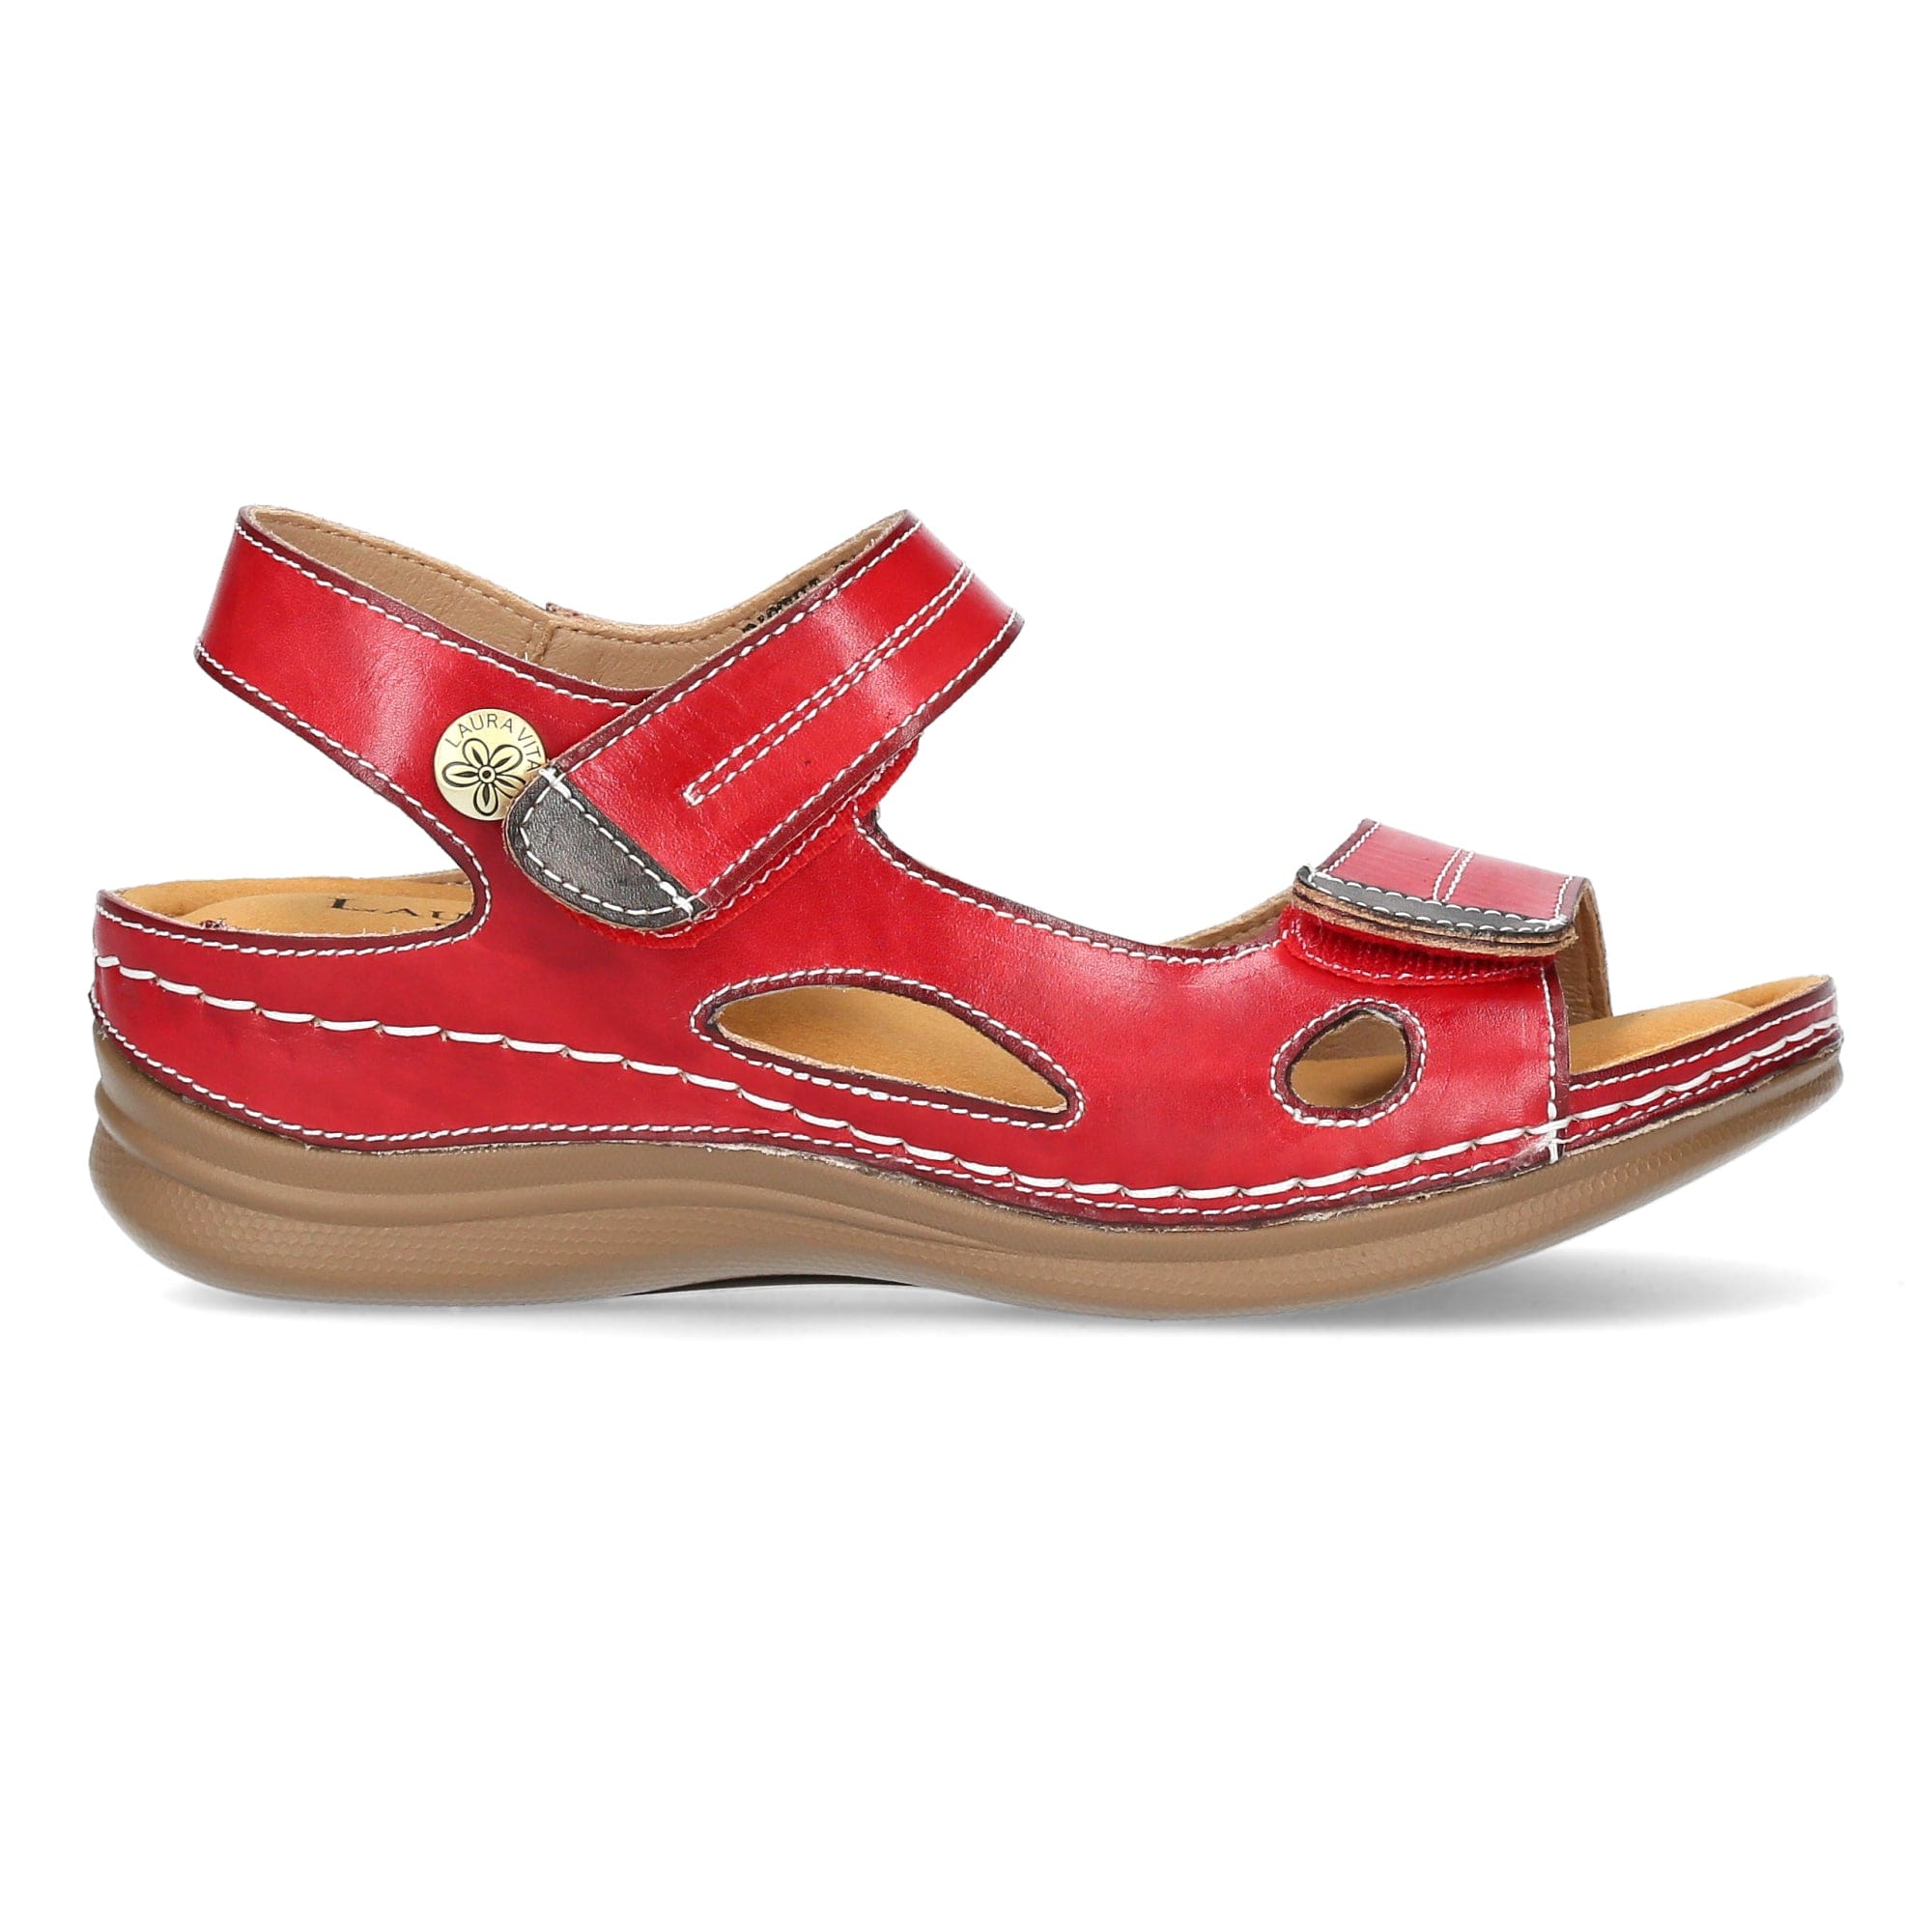 Shoes BISCUIT 124 - 35 / Red - Sandal